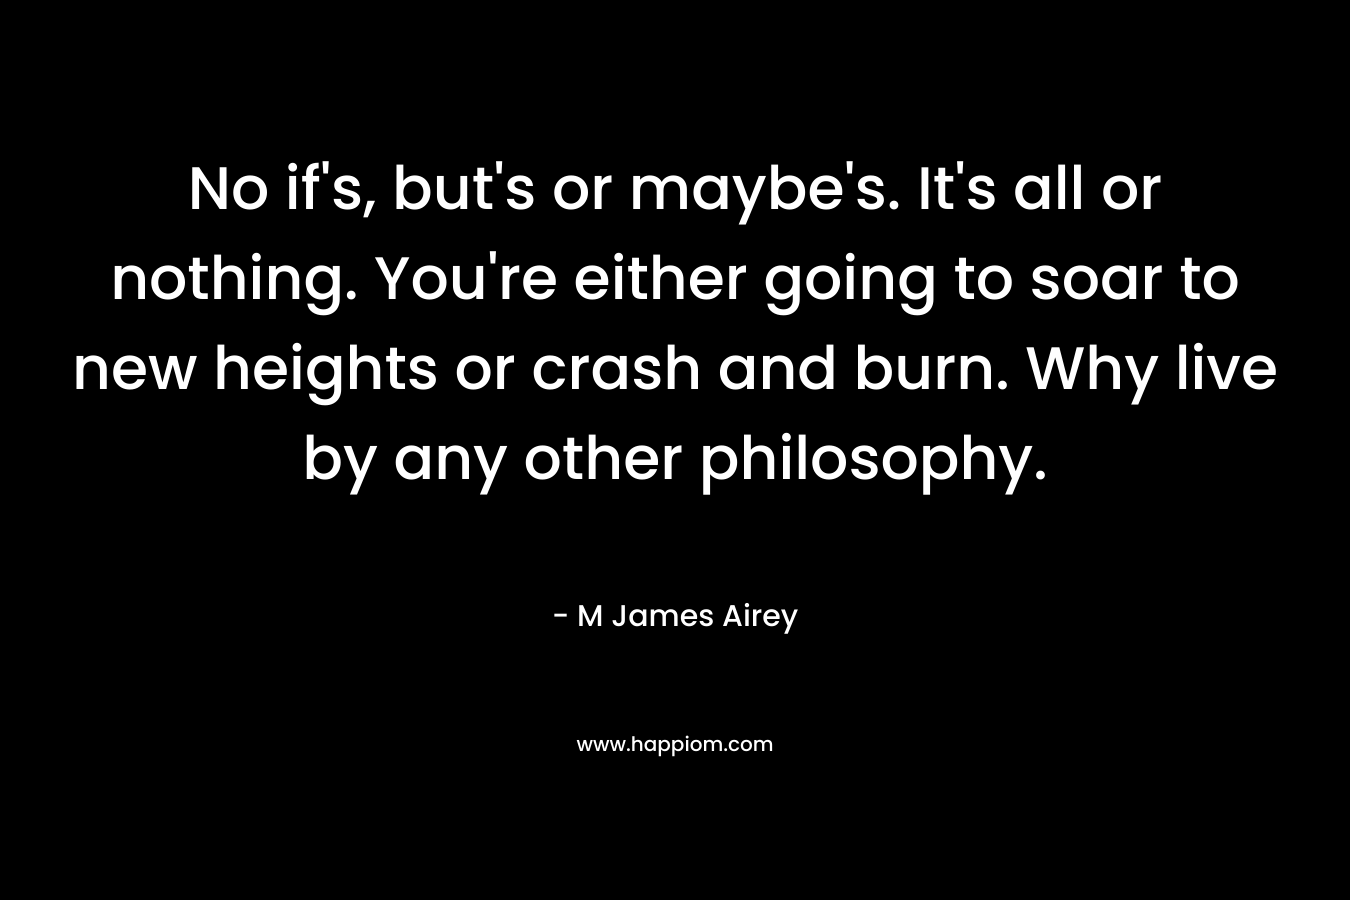 No if’s, but’s or maybe’s. It’s all or nothing. You’re either going to soar to new heights or crash and burn. Why live by any other philosophy. – M James Airey